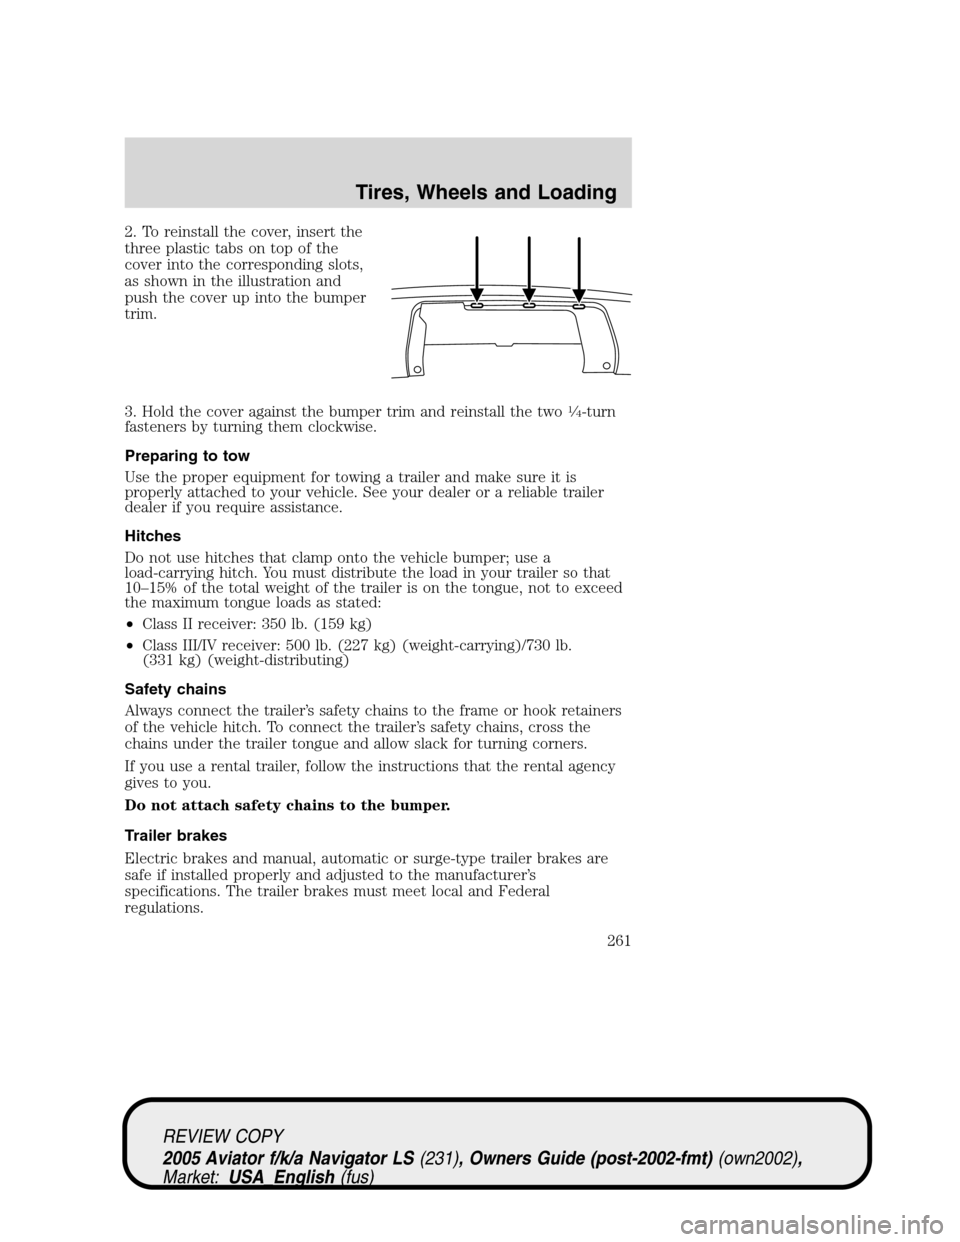 LINCOLN AVIATOR 2005 Service Manual 2. To reinstall the cover, insert the
three plastic tabs on top of the
cover into the corresponding slots,
as shown in the illustration and
push the cover up into the bumper
trim.
3. Hold the cover ag